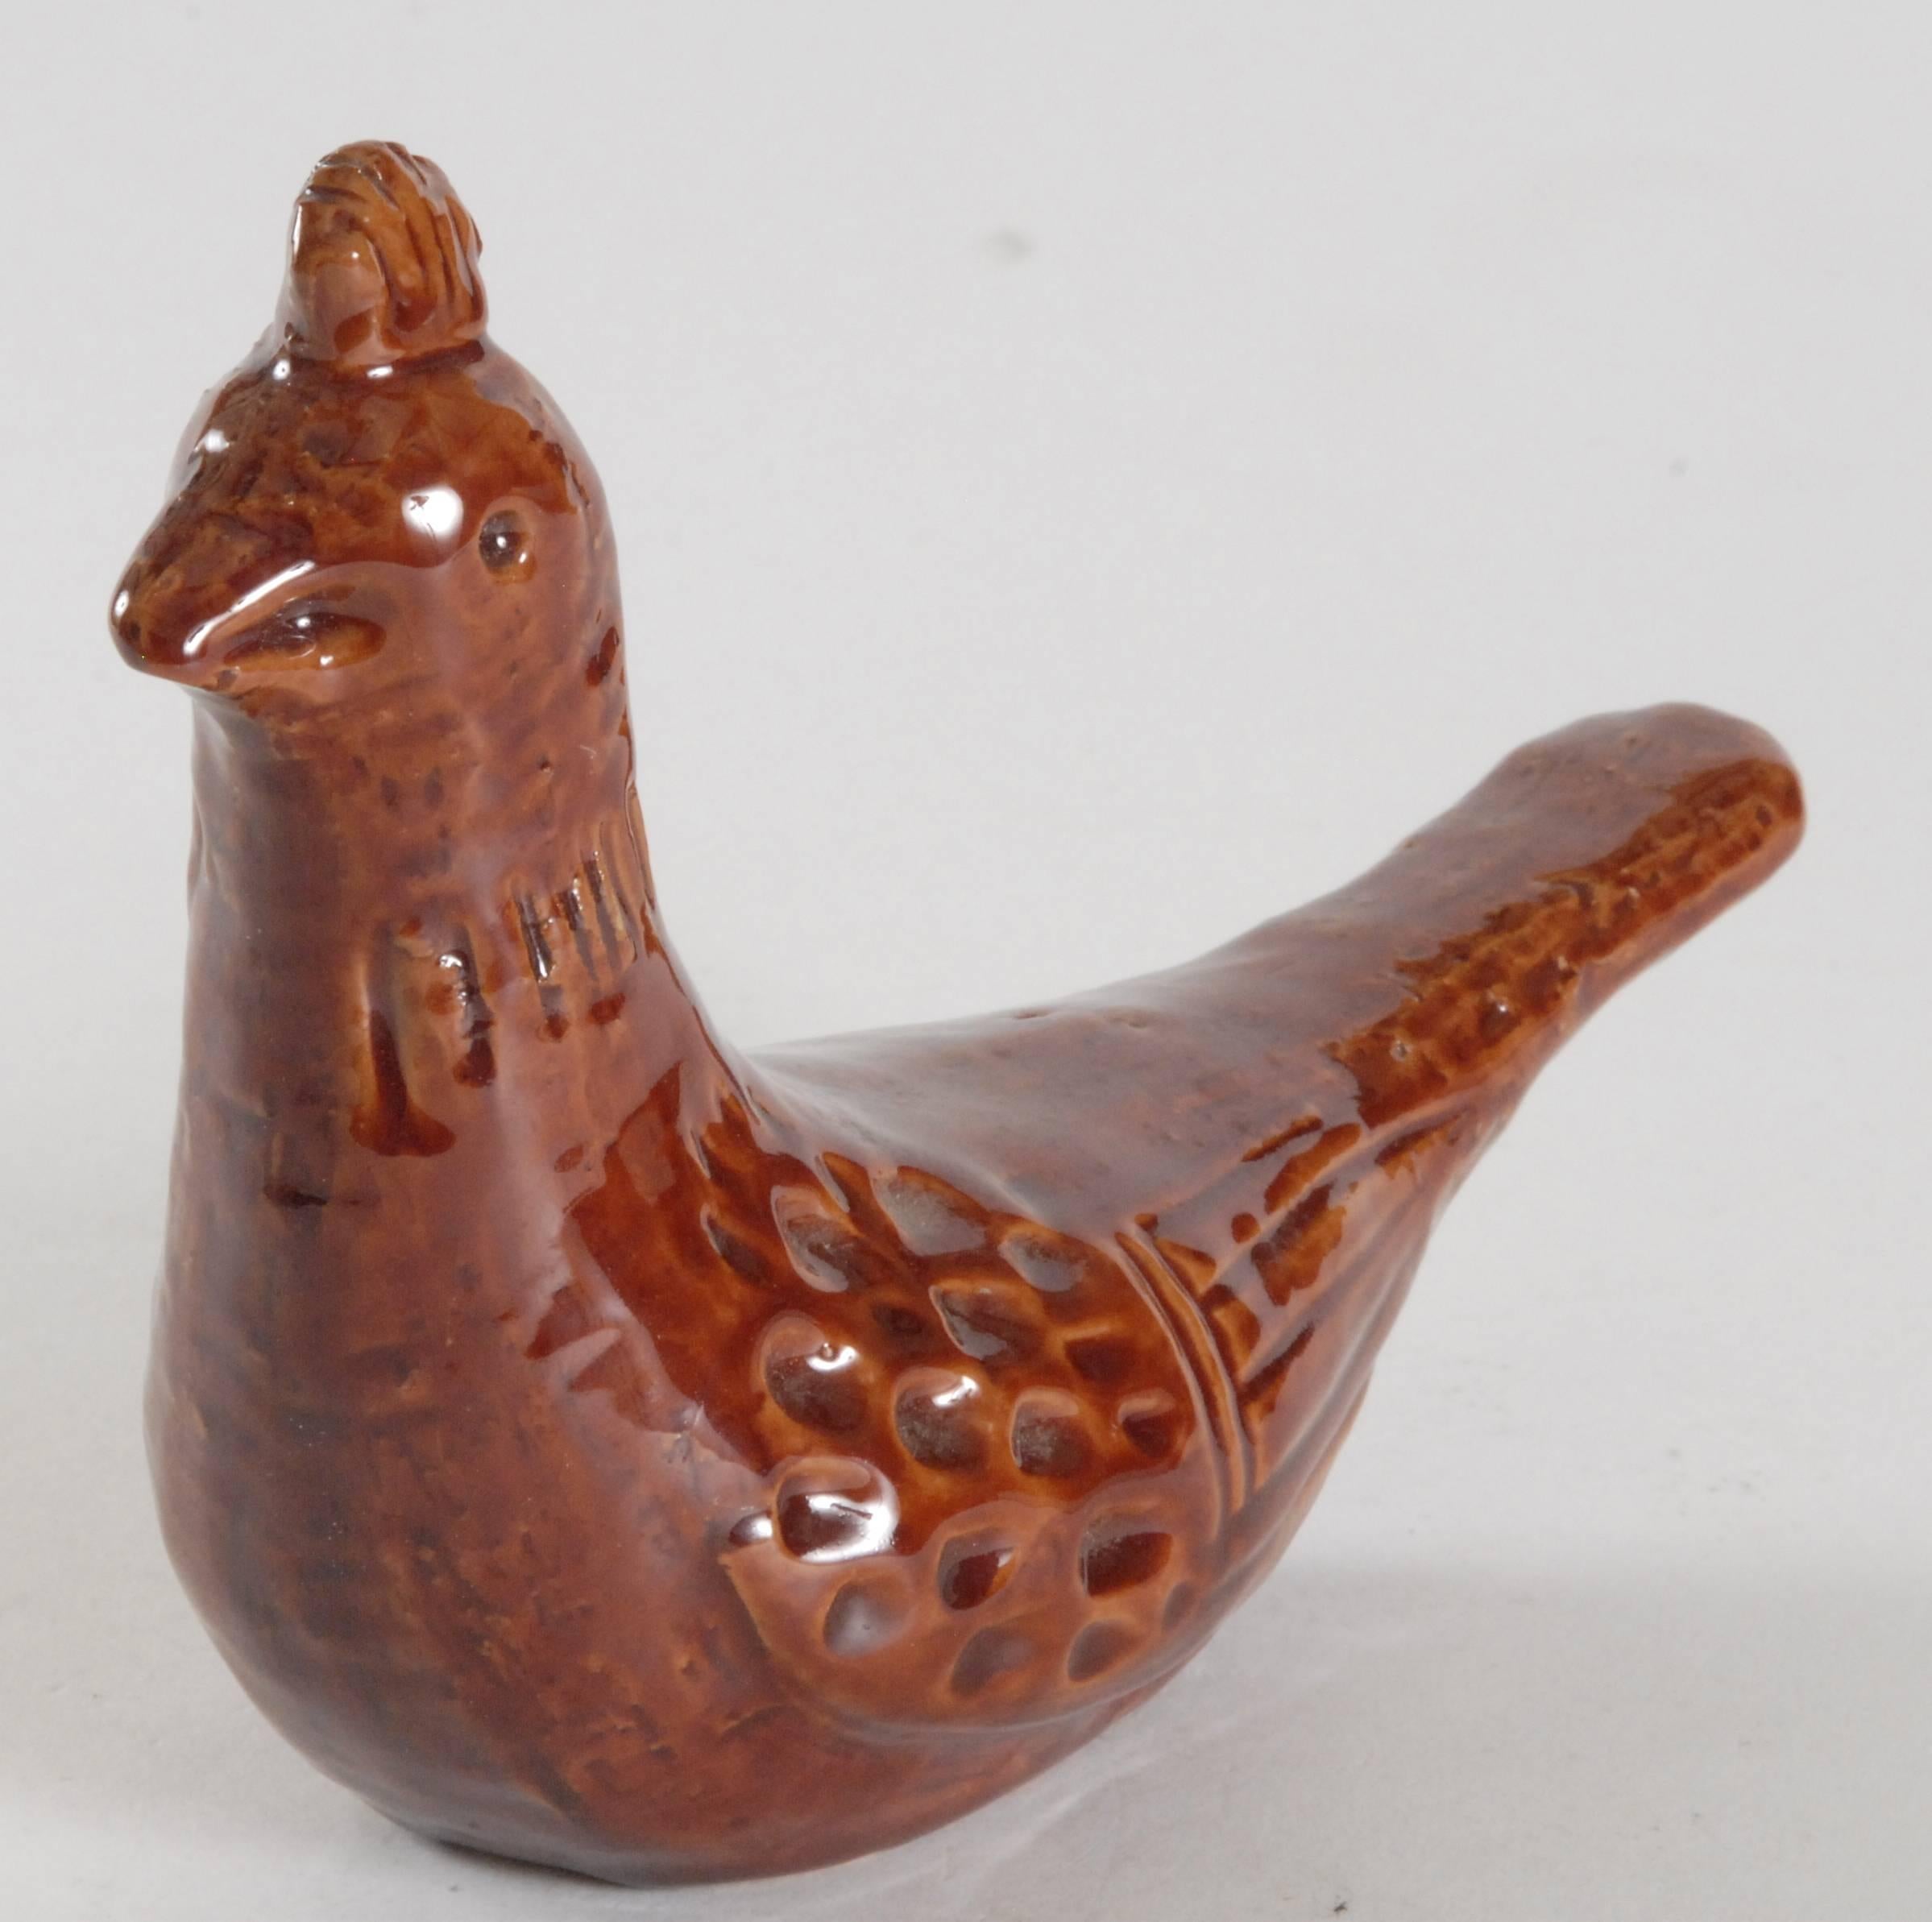 A Londi designed top-knot dove with the more unusual 'Terra Rossa' glaze. 